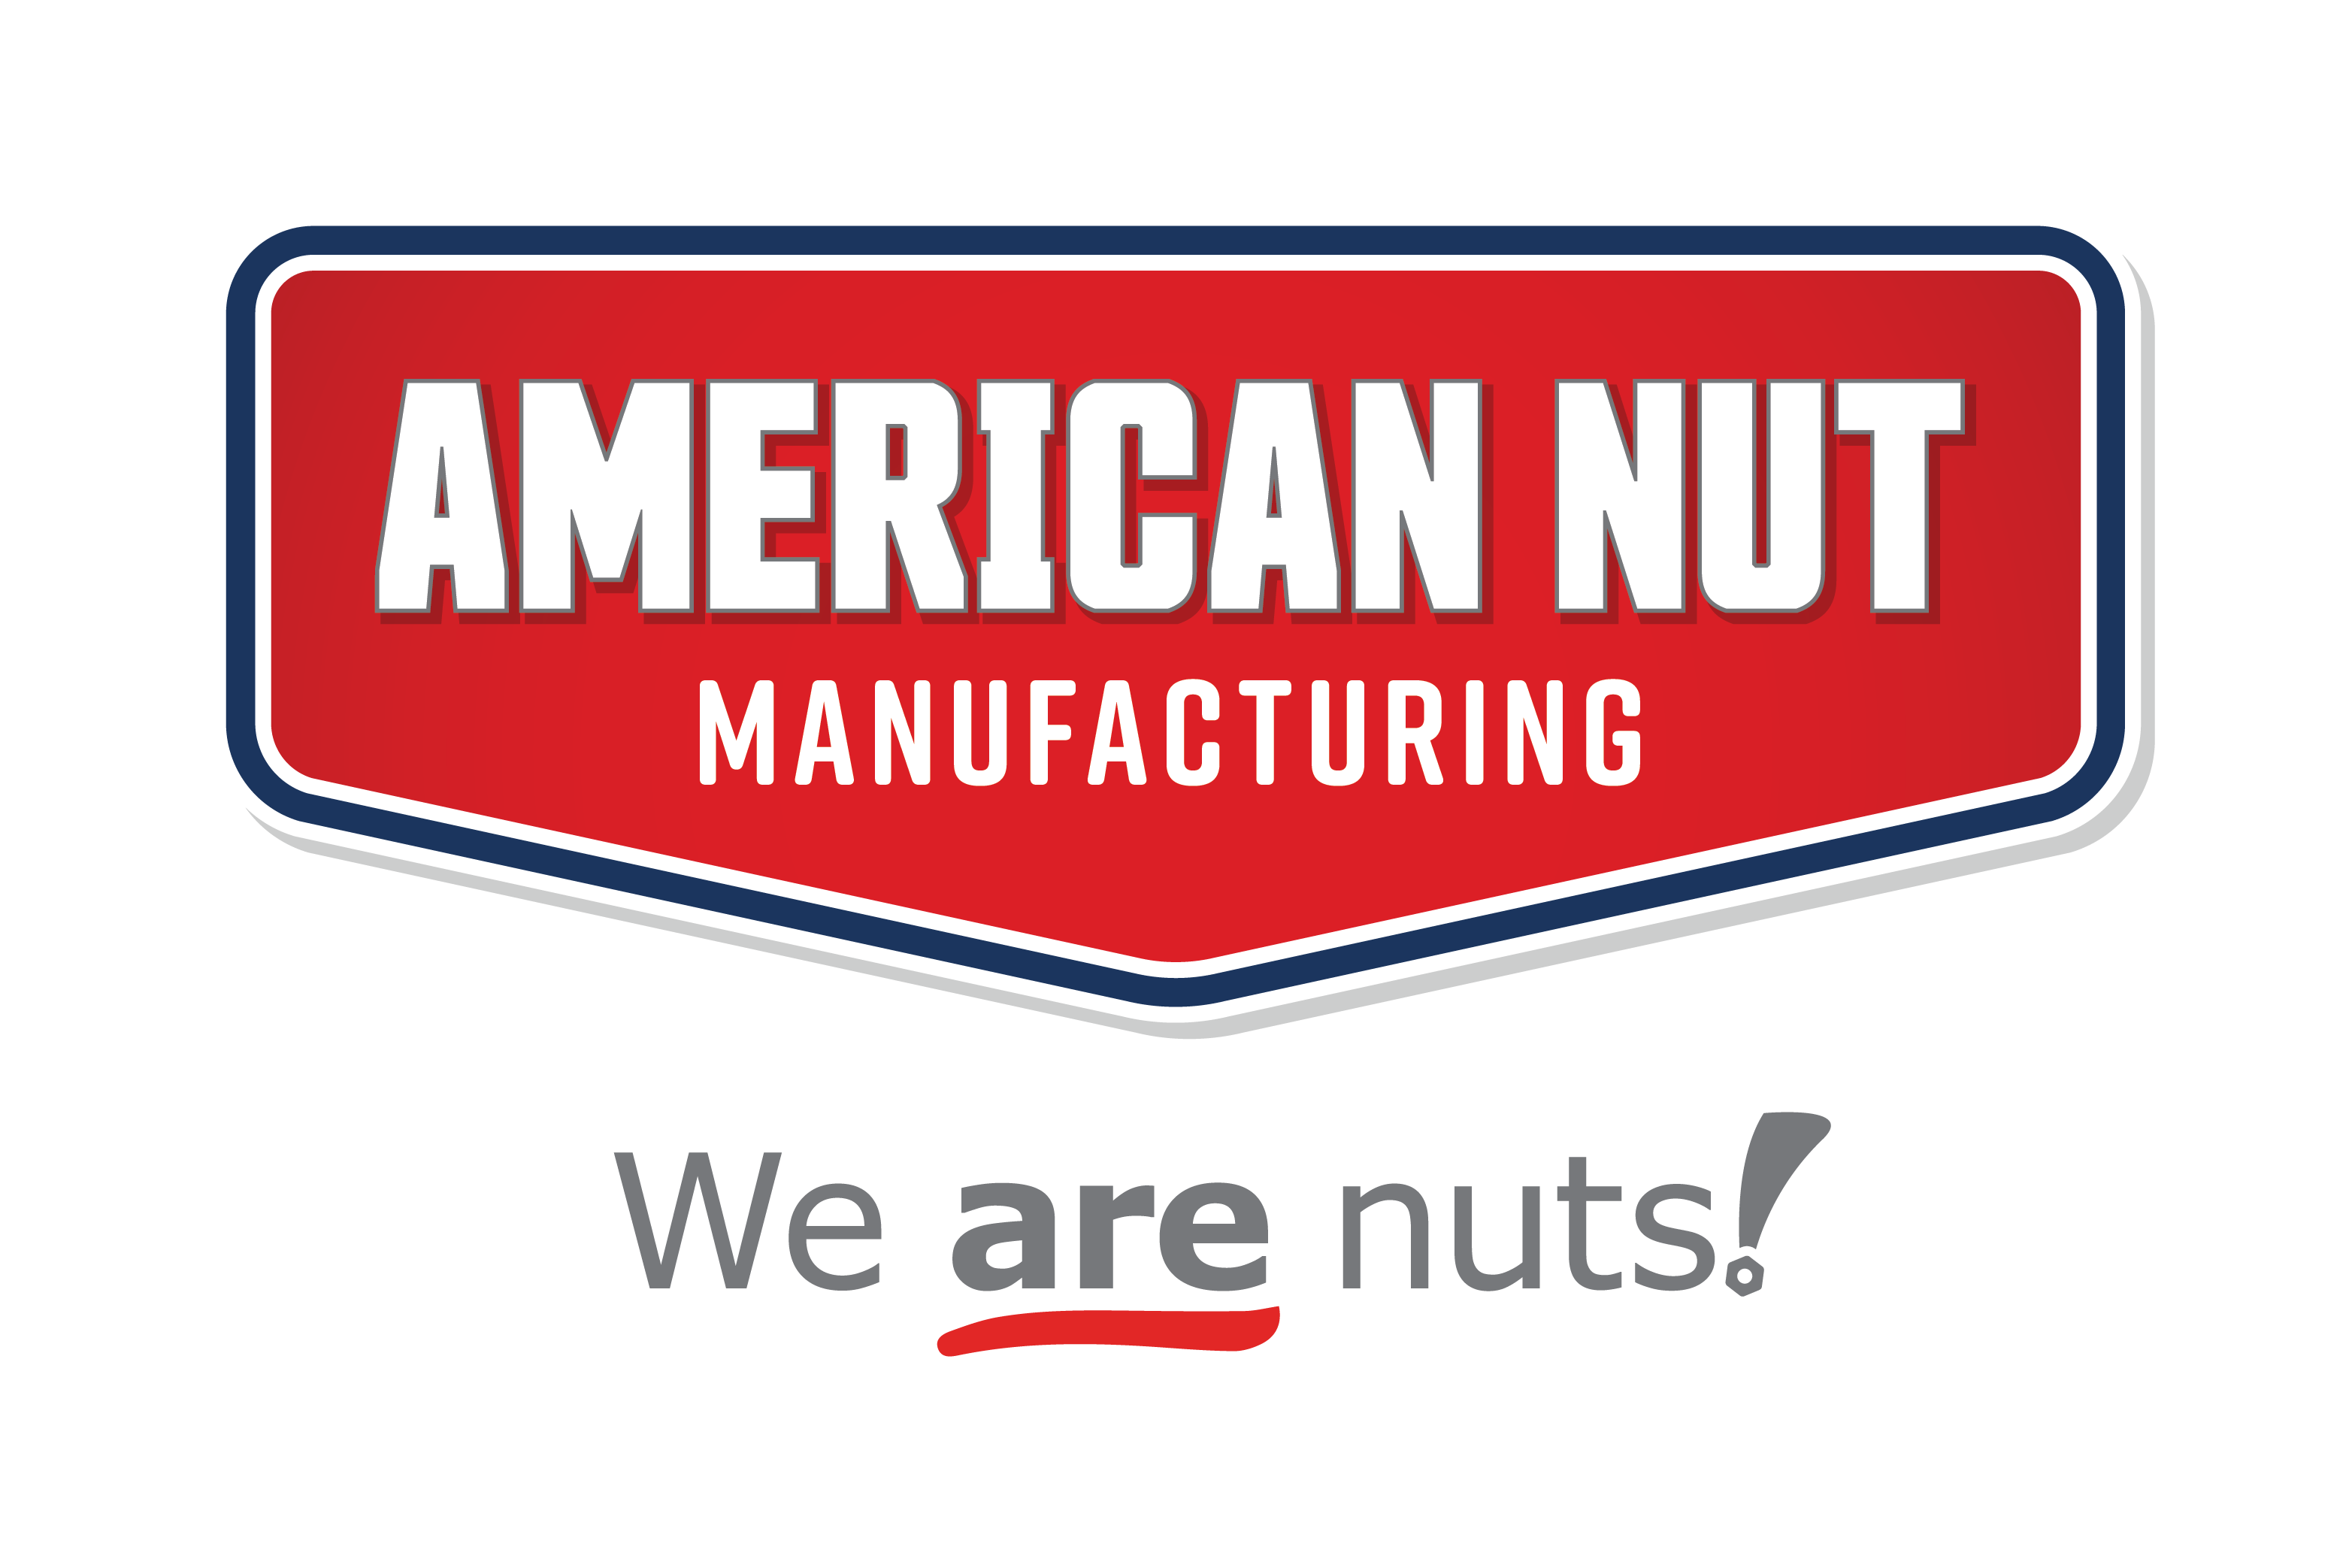 American Nut Manufacturing